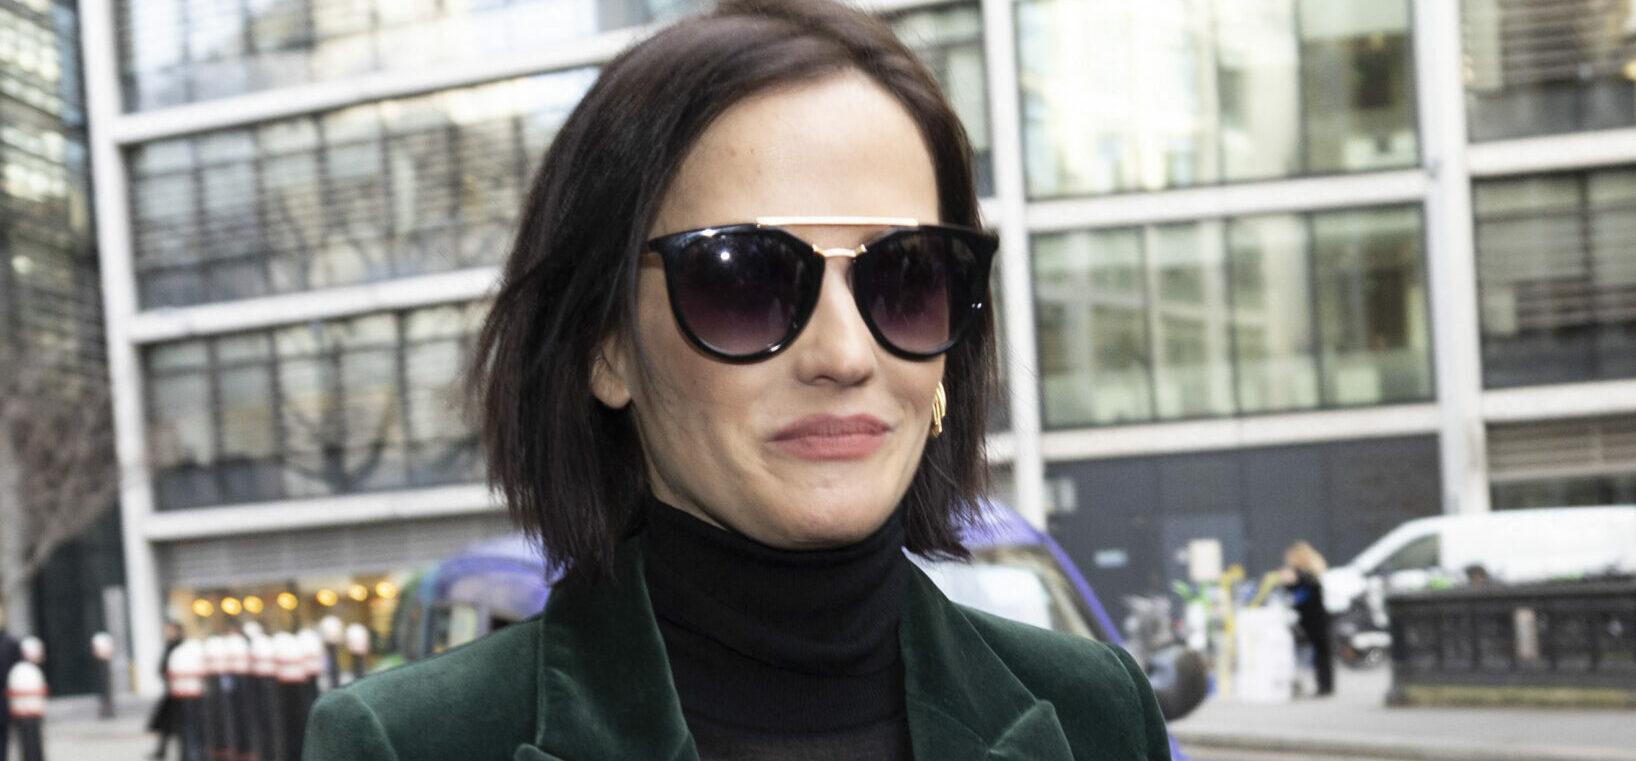 ‘Penny Dreadful’ Eva Green Referred To As ‘Cruella’ On Set Amid Lawsuit Over Failed Film